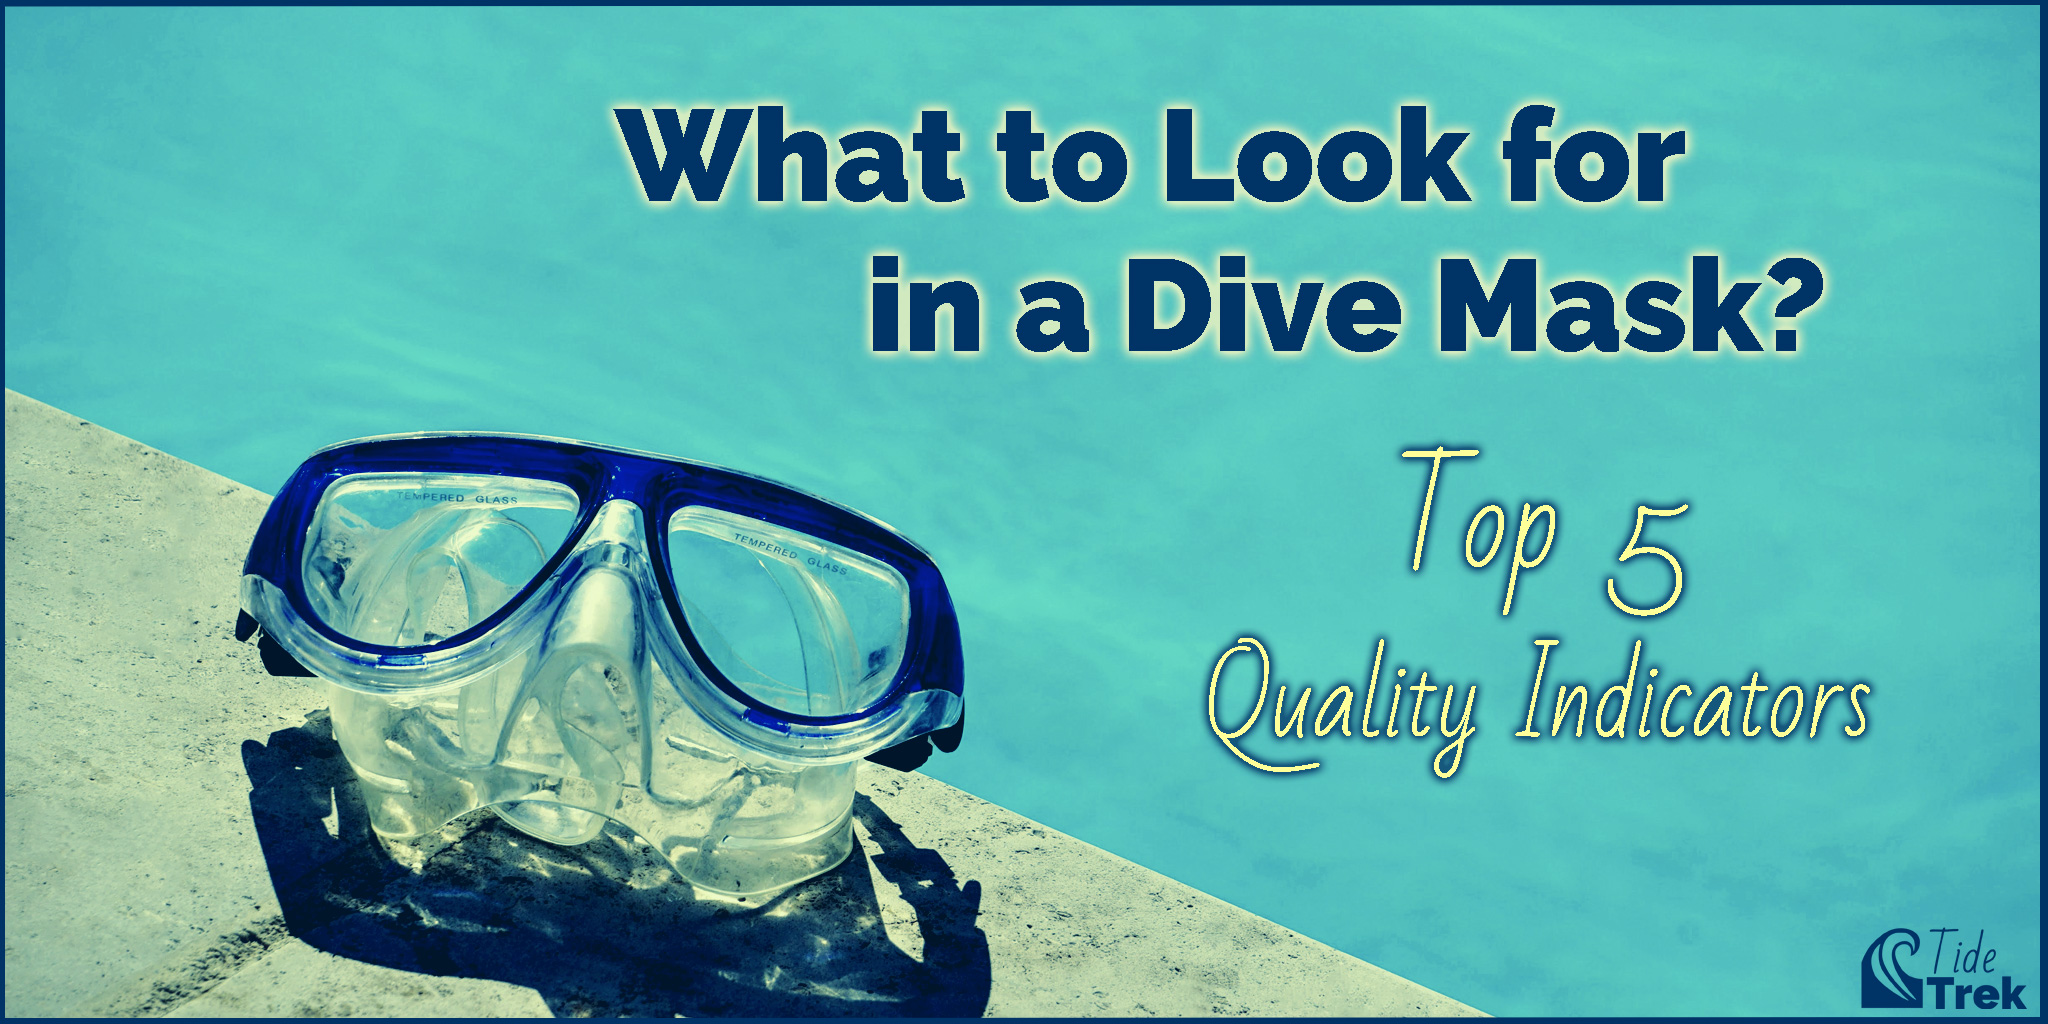 What to look for in a dive mask? Top 5 quality indicators